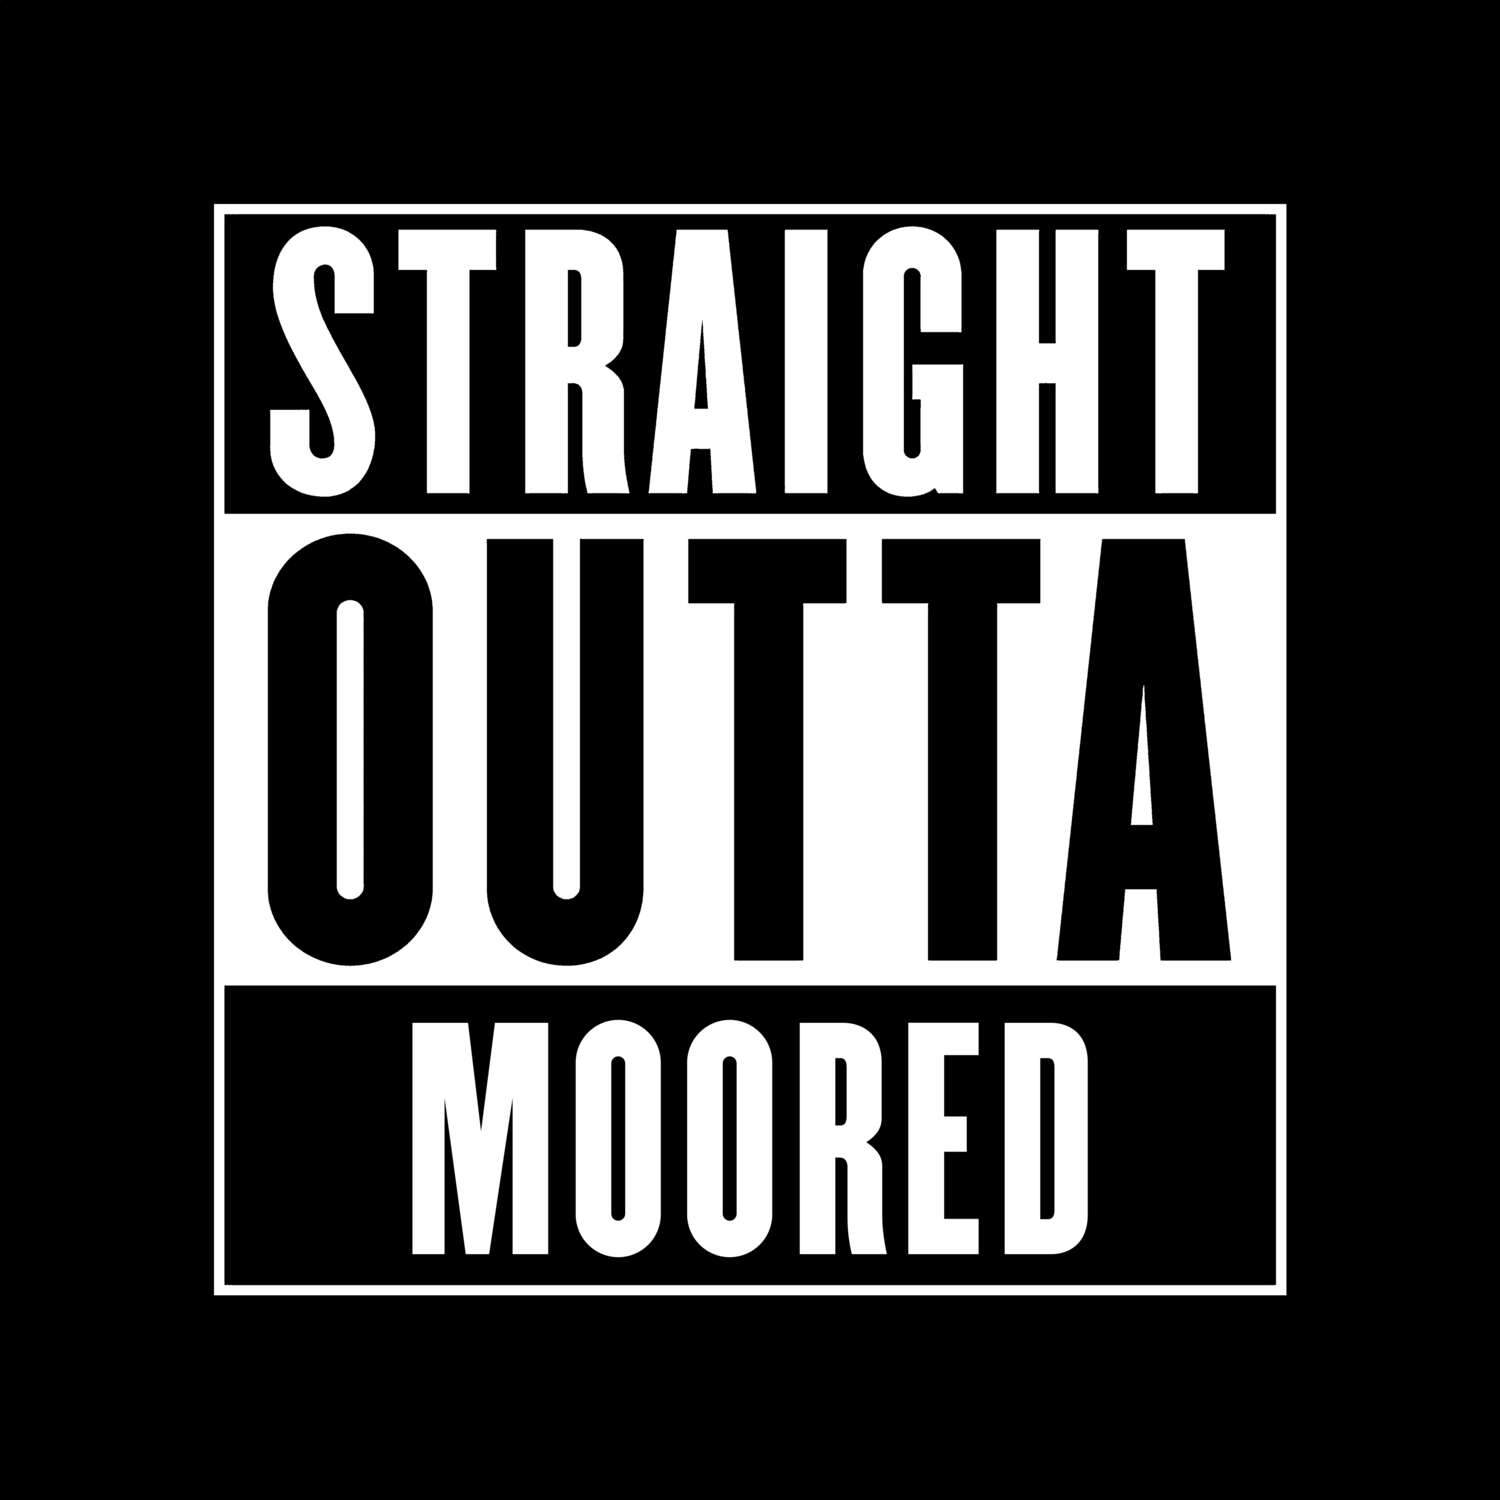 Moored T-Shirt »Straight Outta«